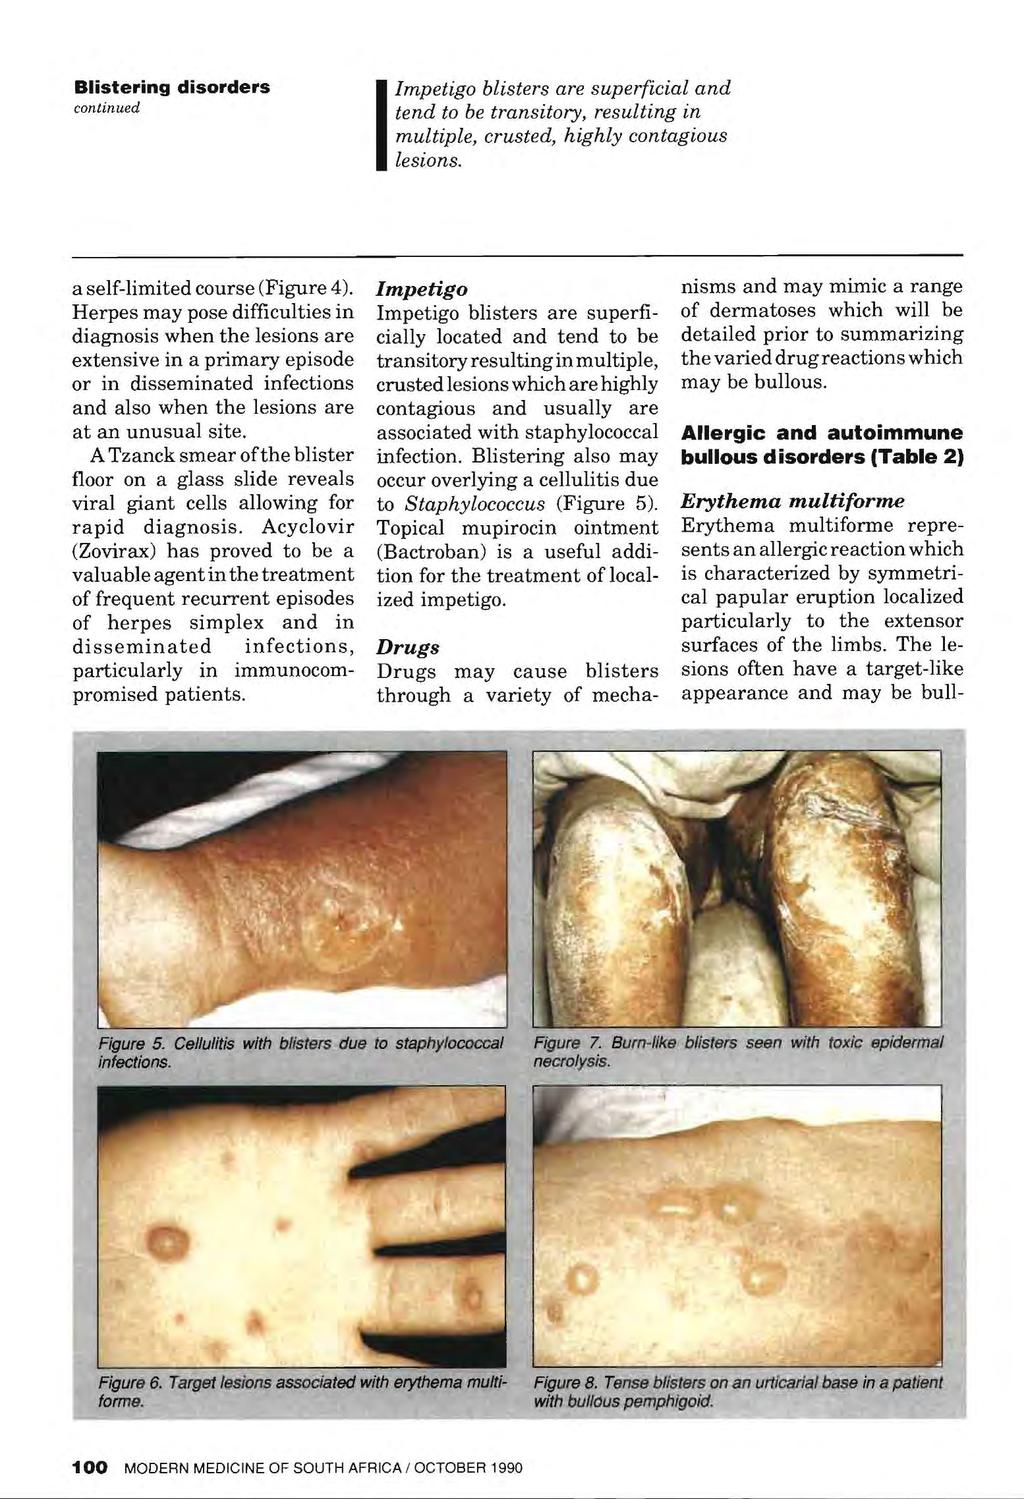 Impetigo blisters are superficial and continued I ten(i f0 transitory, resulting in multiple, crusted, highly contagious lesions. a self-limited course (Figure 4).